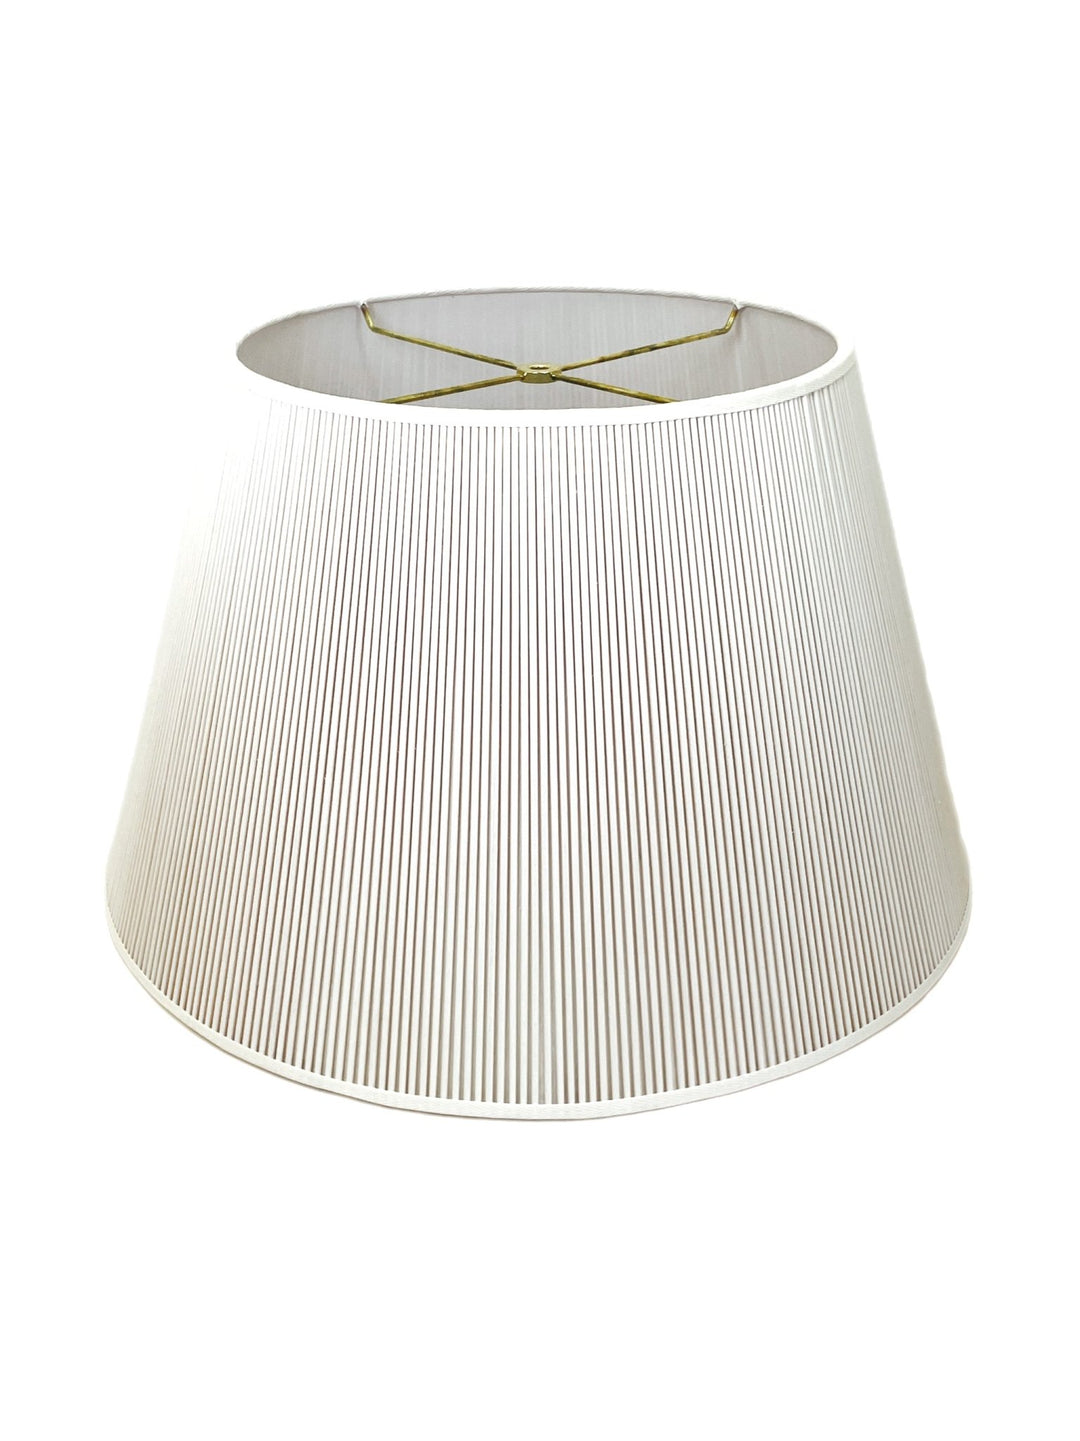 10" SOLID WHITE STICK LAMP SHADE - (1) in stock and ready to ship - Lux Lamp Shades